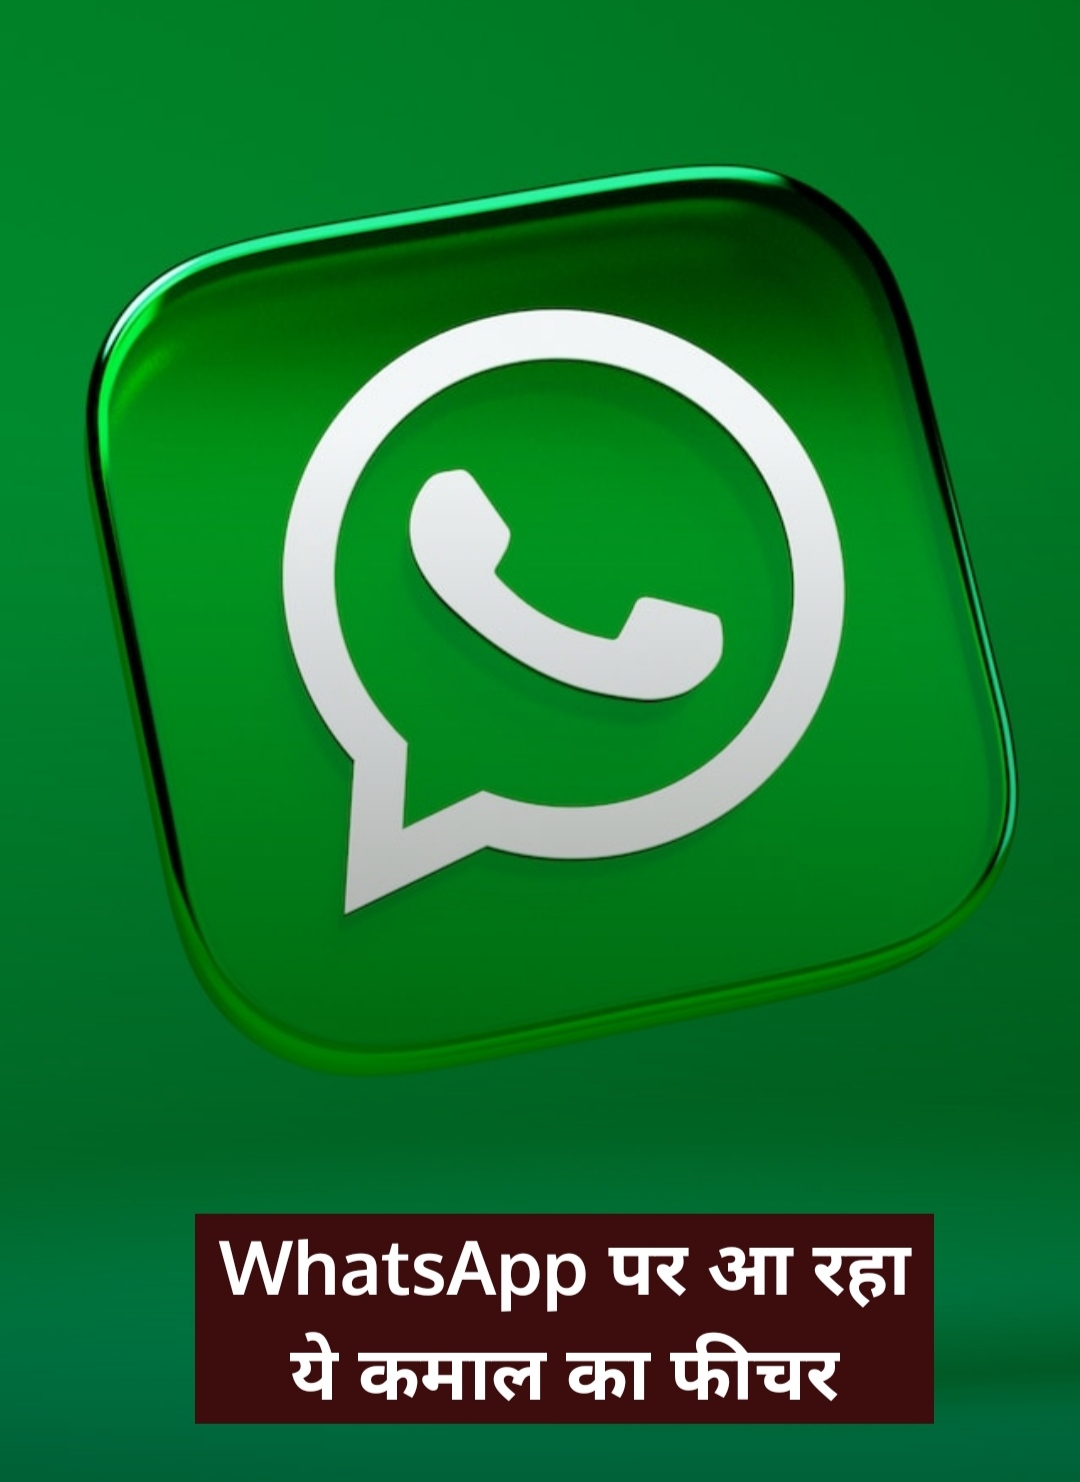 Message editing feature is coming in WhatsApp